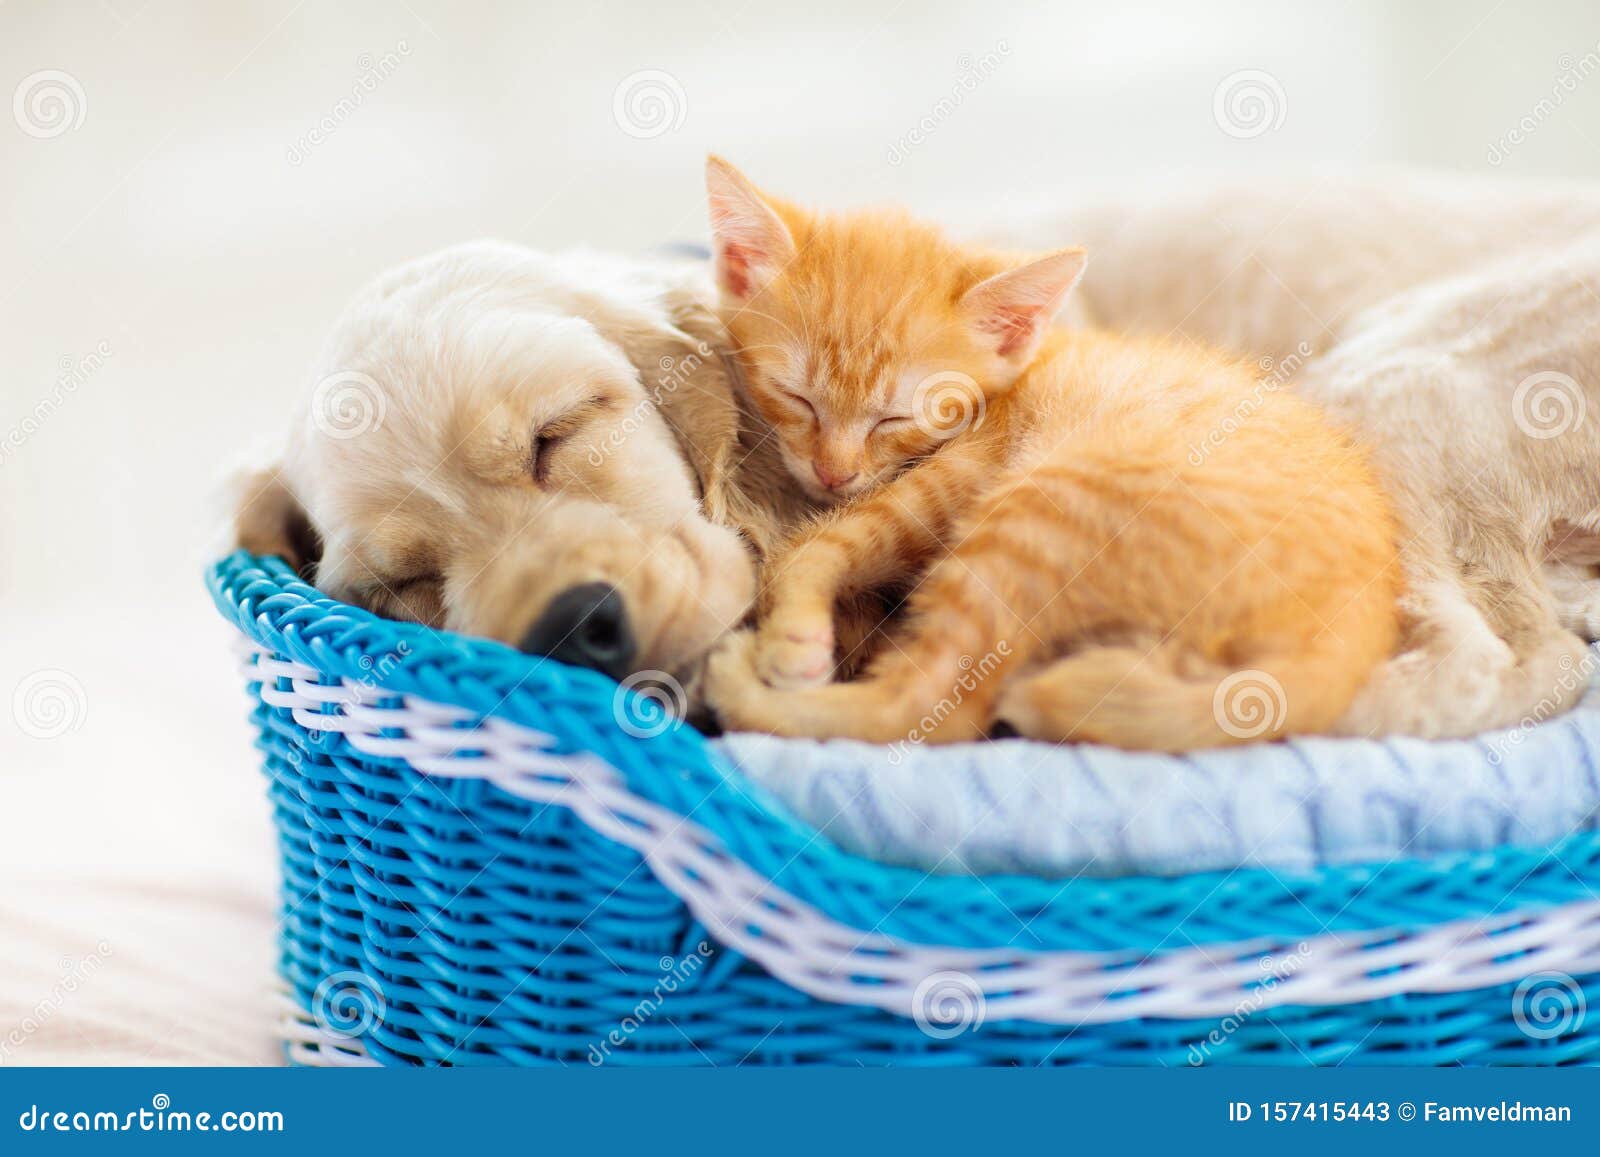 Child, Dog and Cat. Kids Play with Puppy, Kitten Stock Image ...